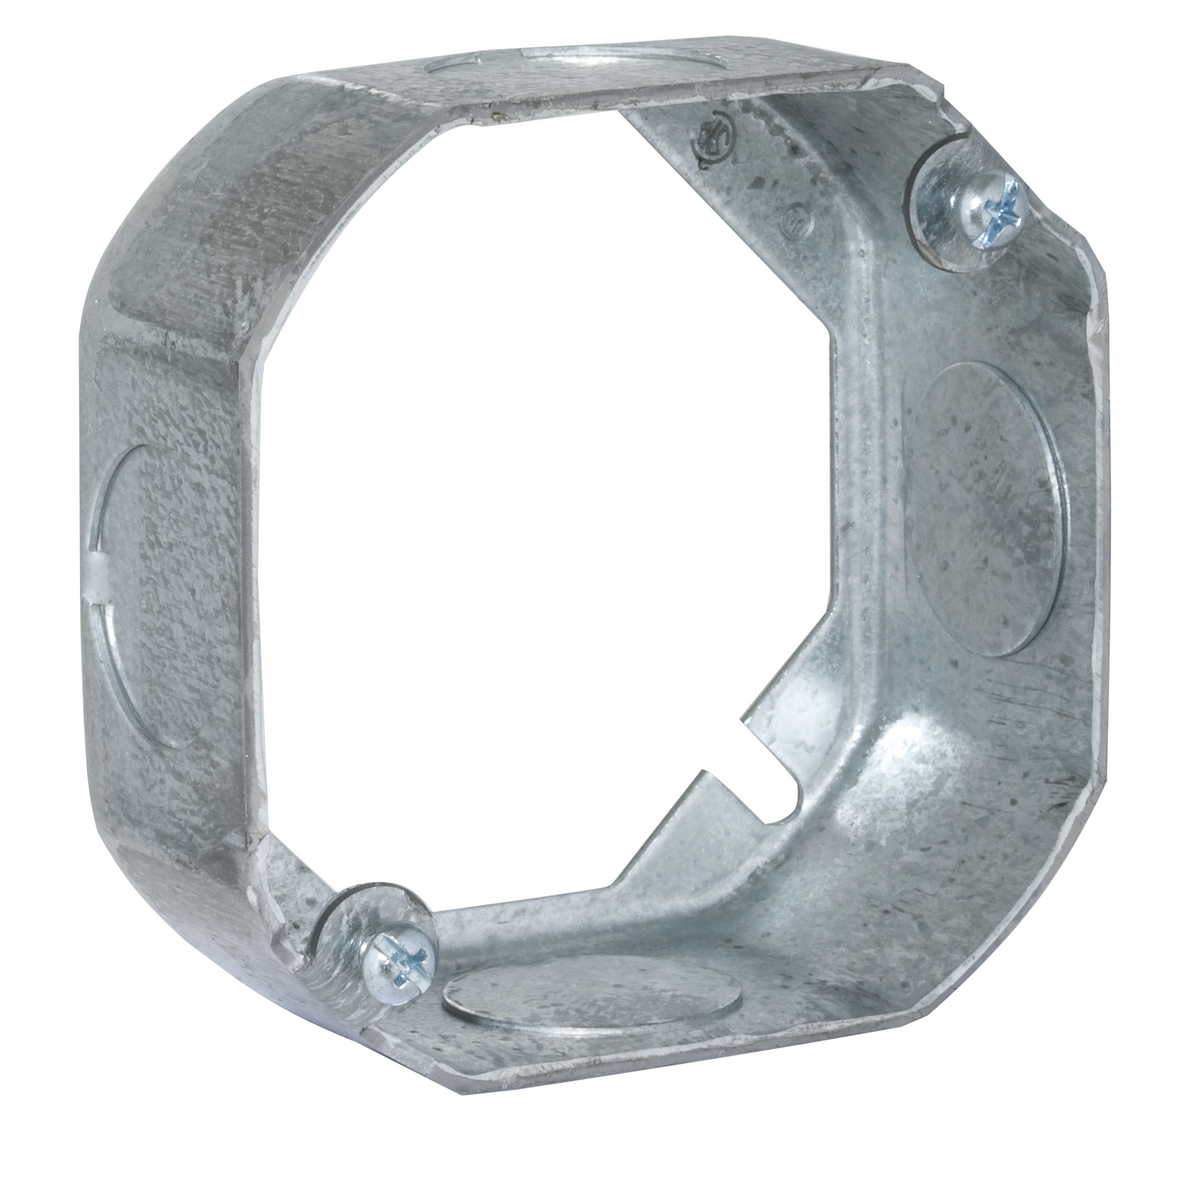 4 In. Octagon Extension Rings, 1-1/2 In. Deep - Drawn with Conduit 3/4KO's